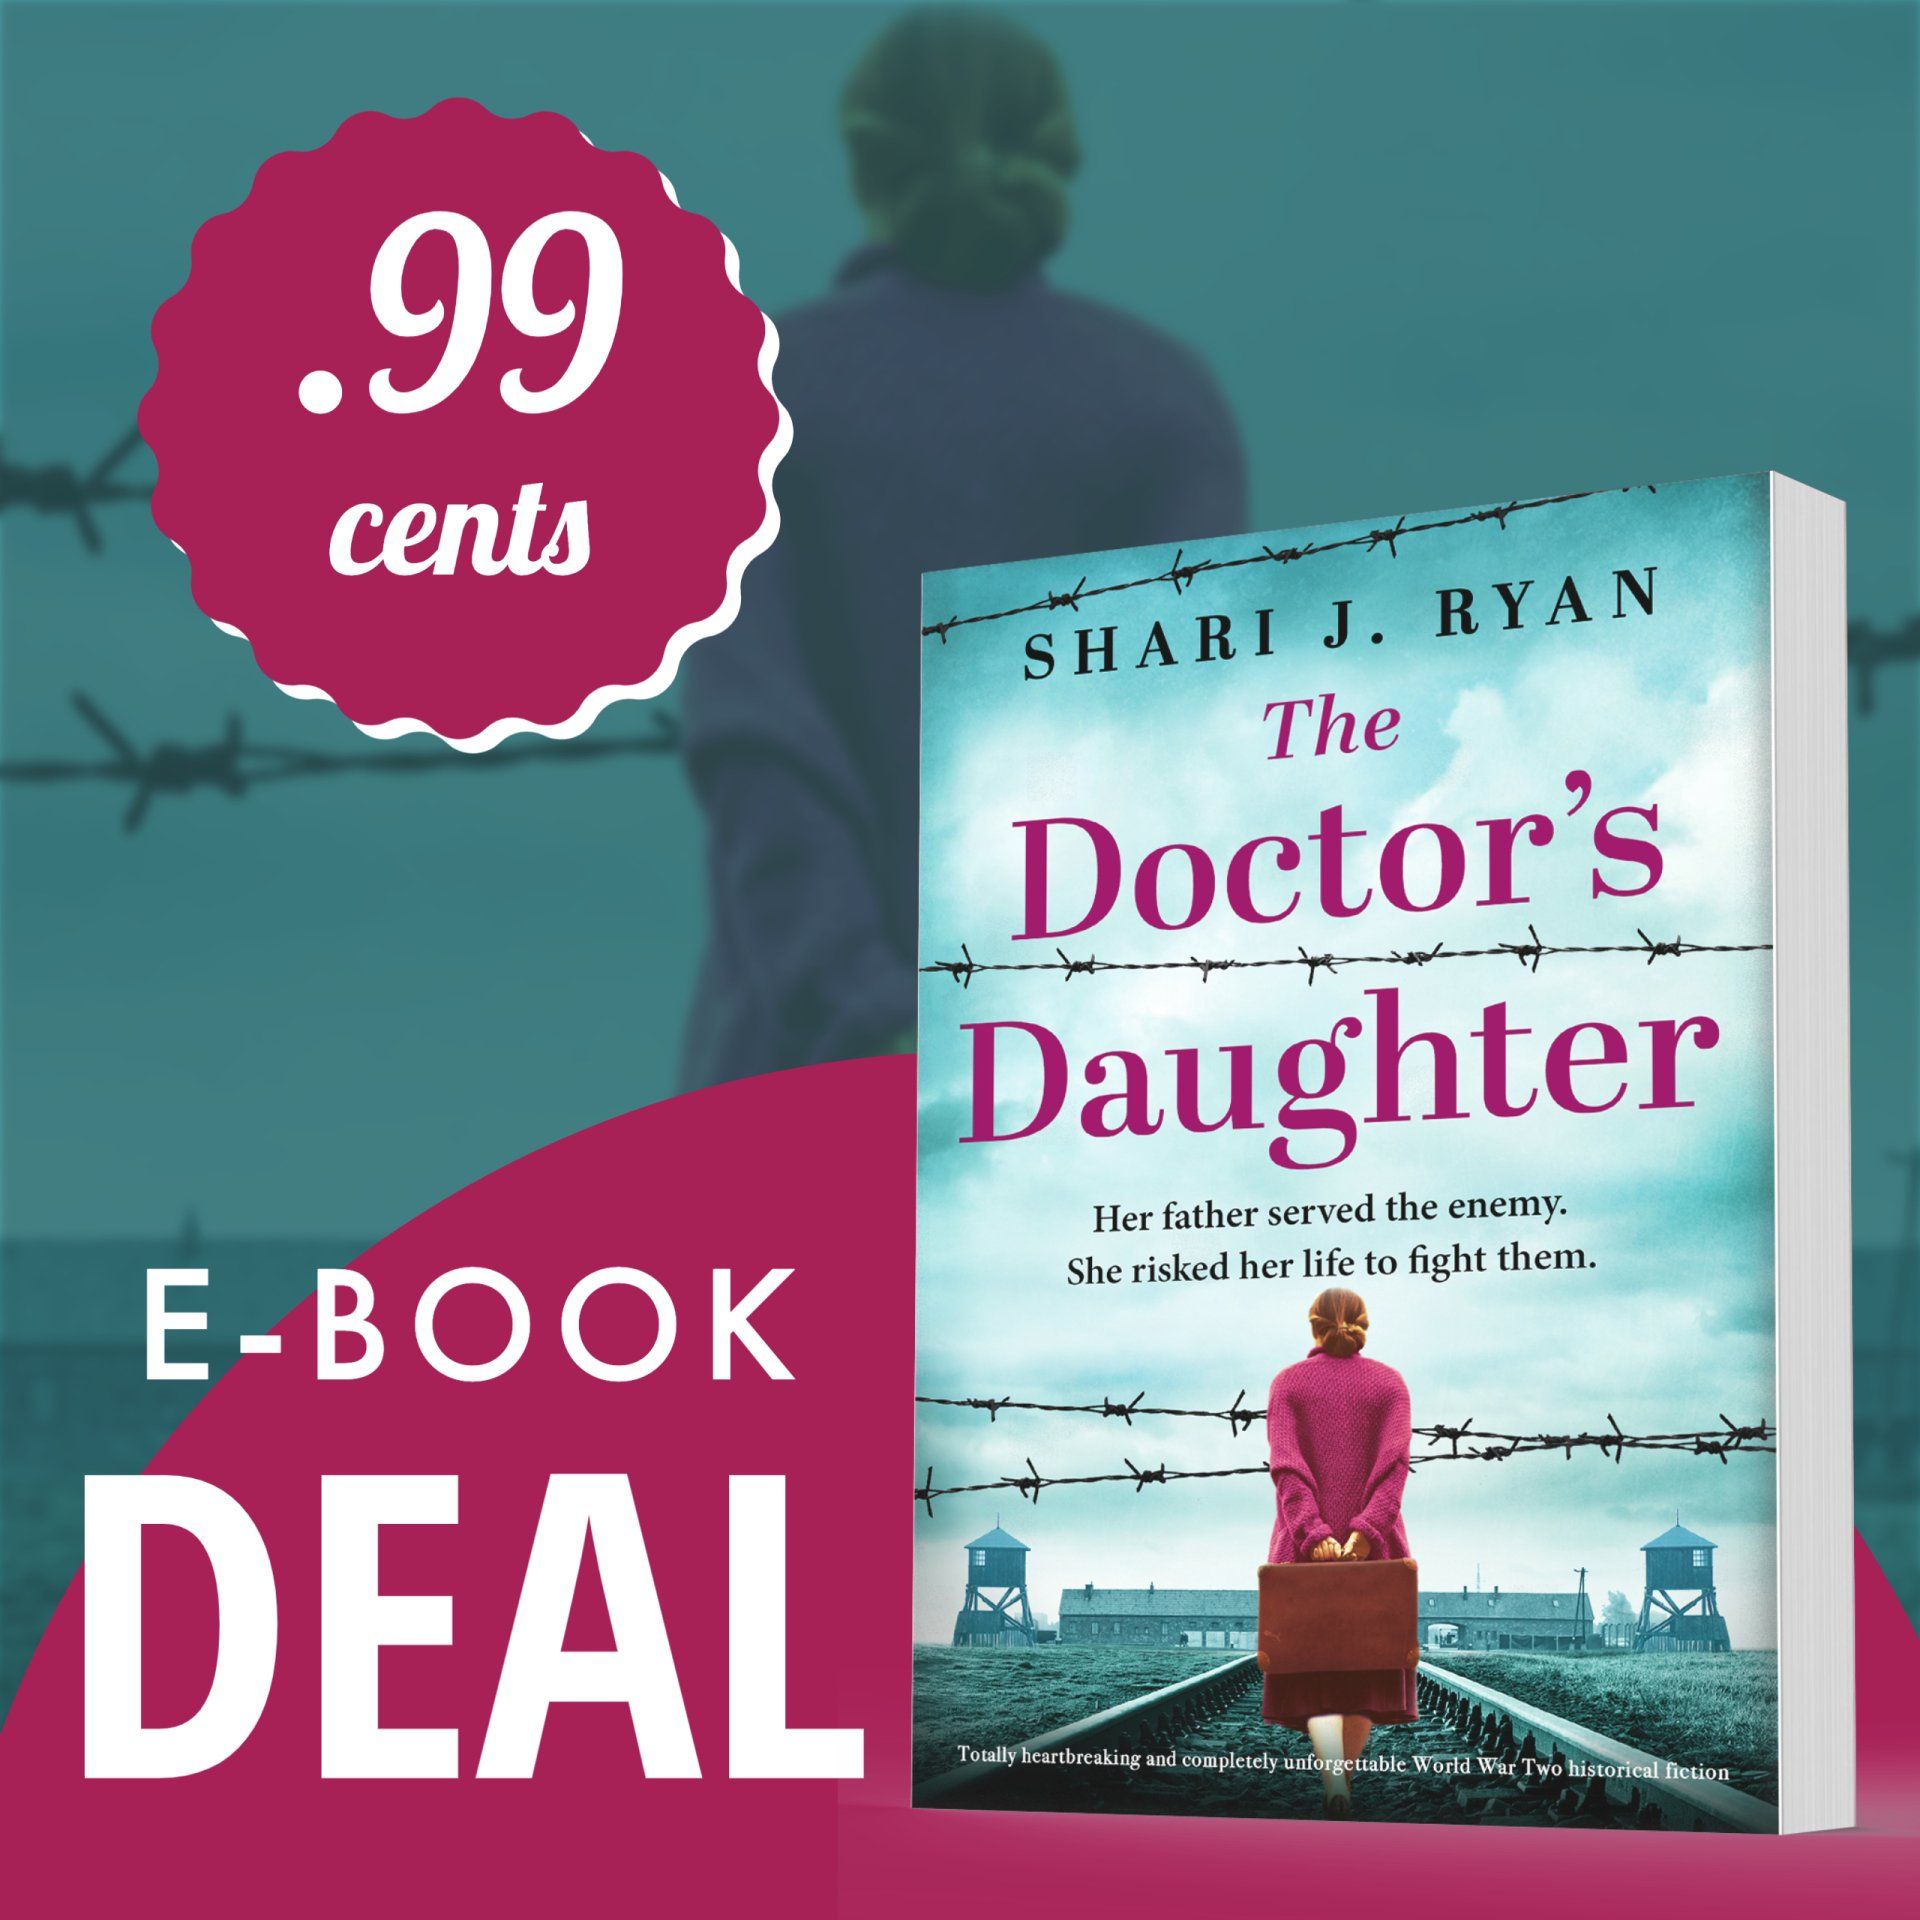 Bestselling Historical Fiction Novel, The Doctor's Daughter by Shari J. Ryan